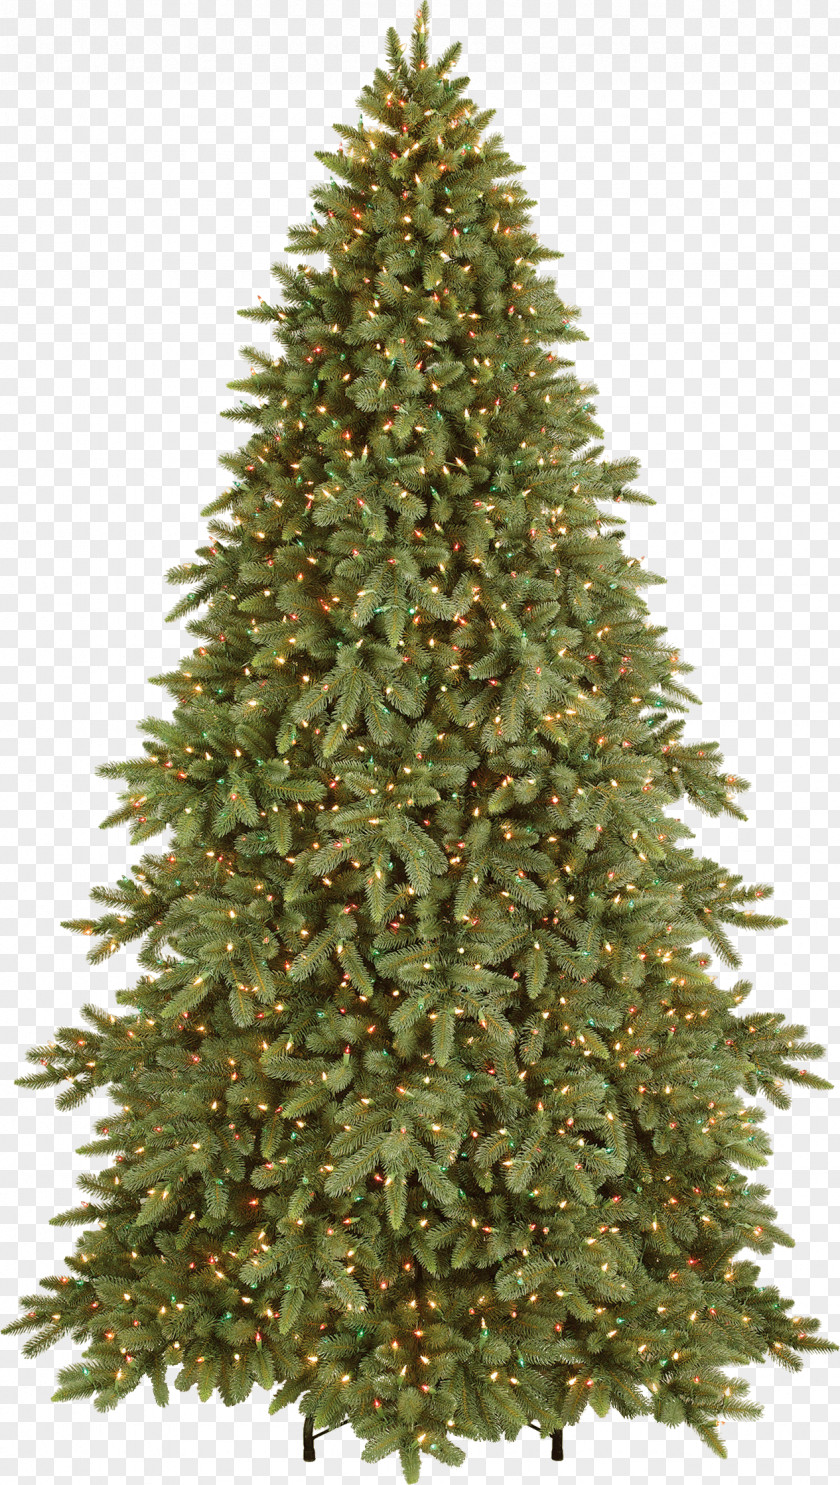 Spruce Artificial Christmas Tree Pre-lit PNG